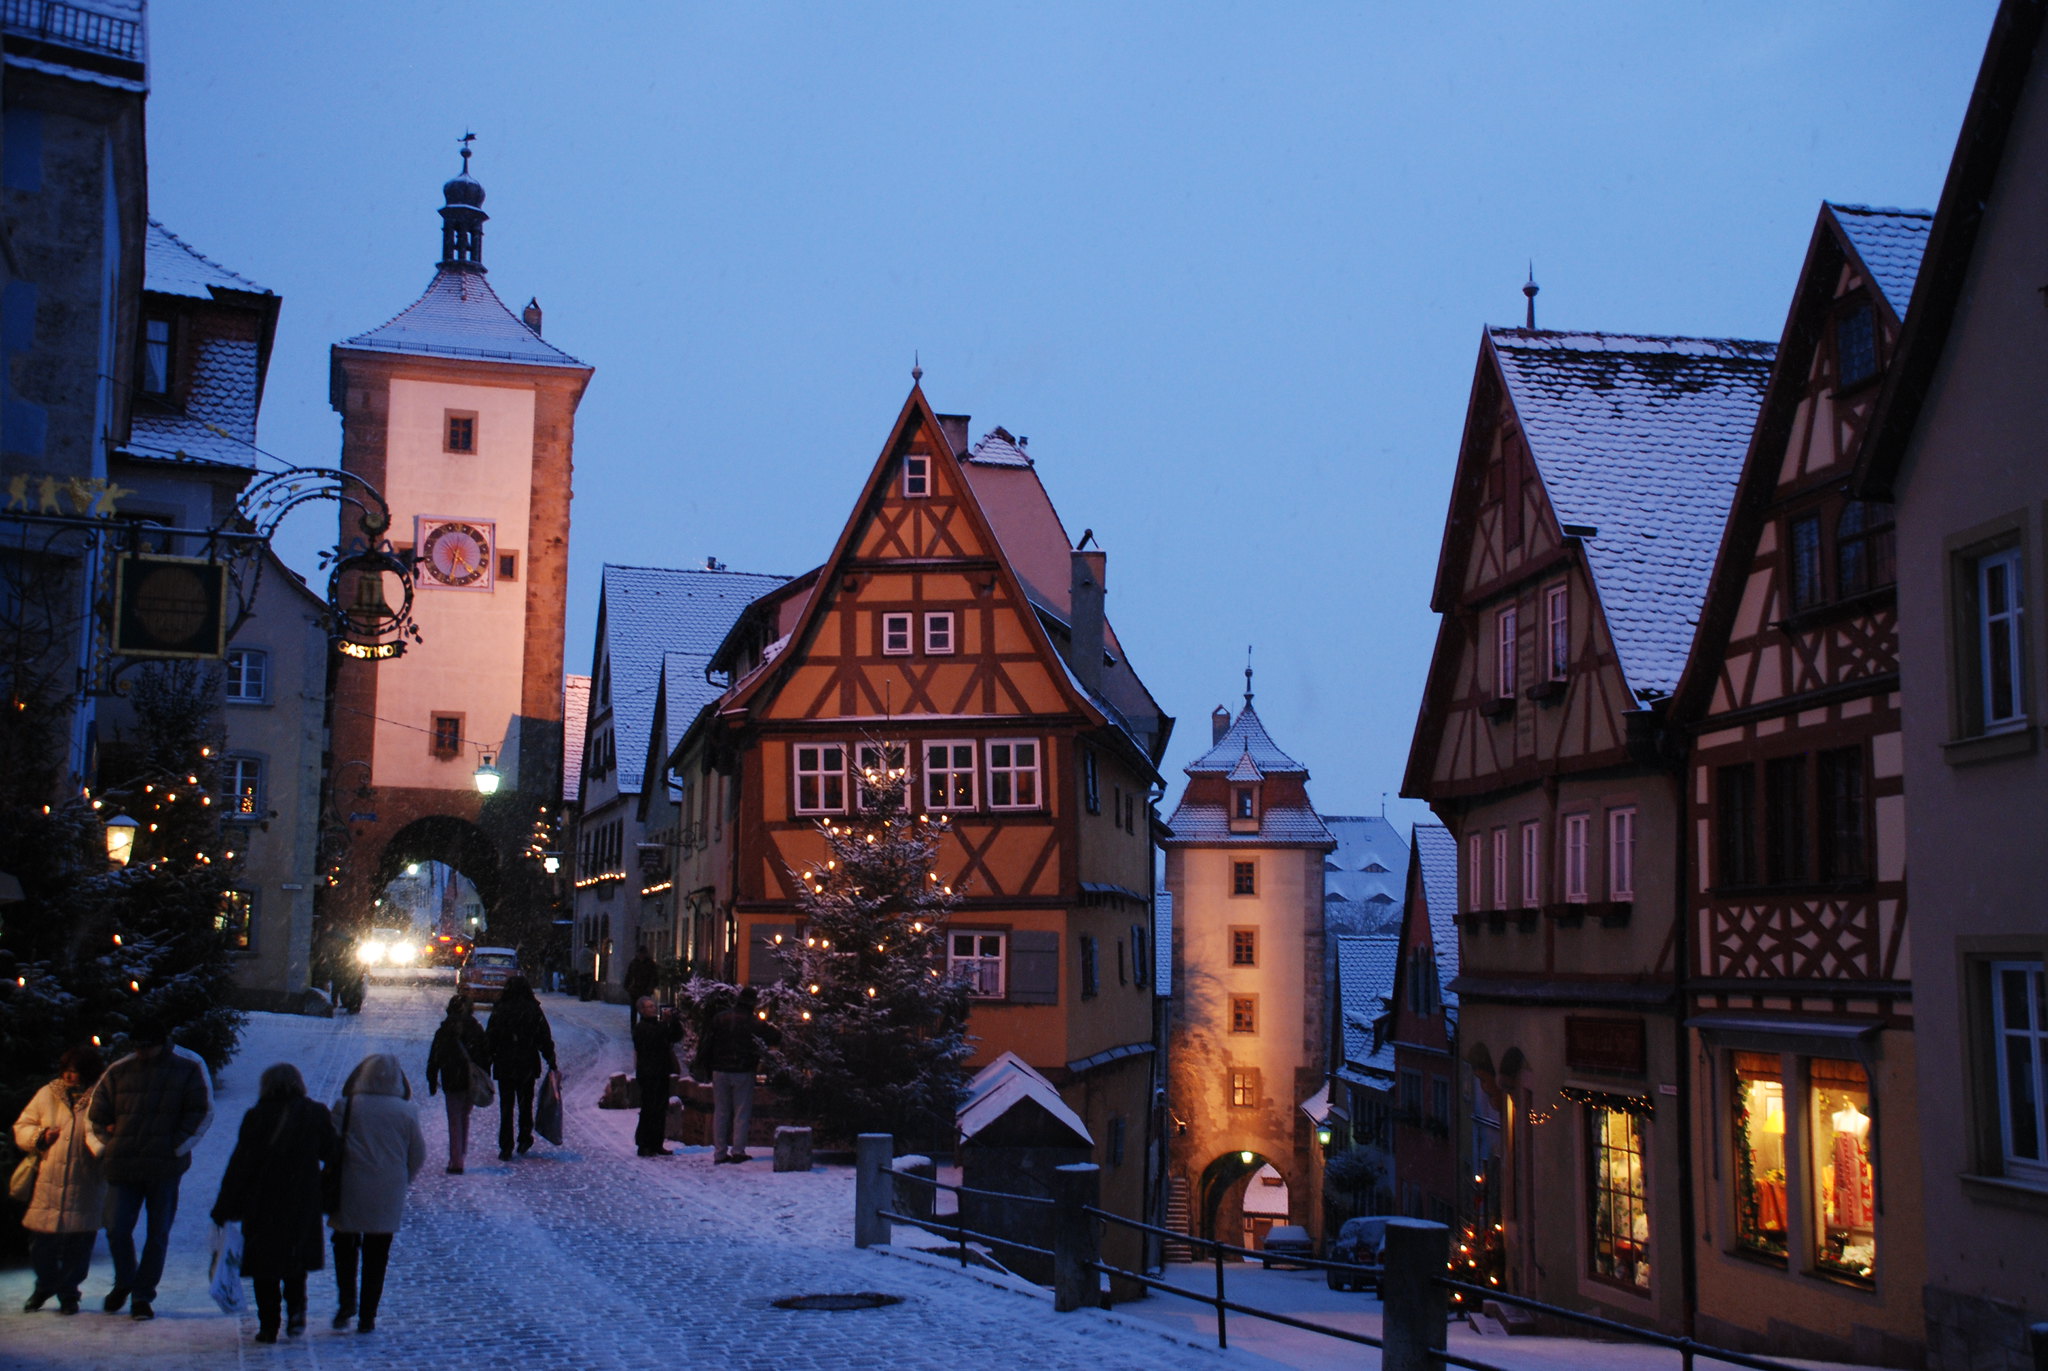 General 2048x1371 Germany street architecture snow idyllic Rothenburg ob der Tauber winter cityscape people